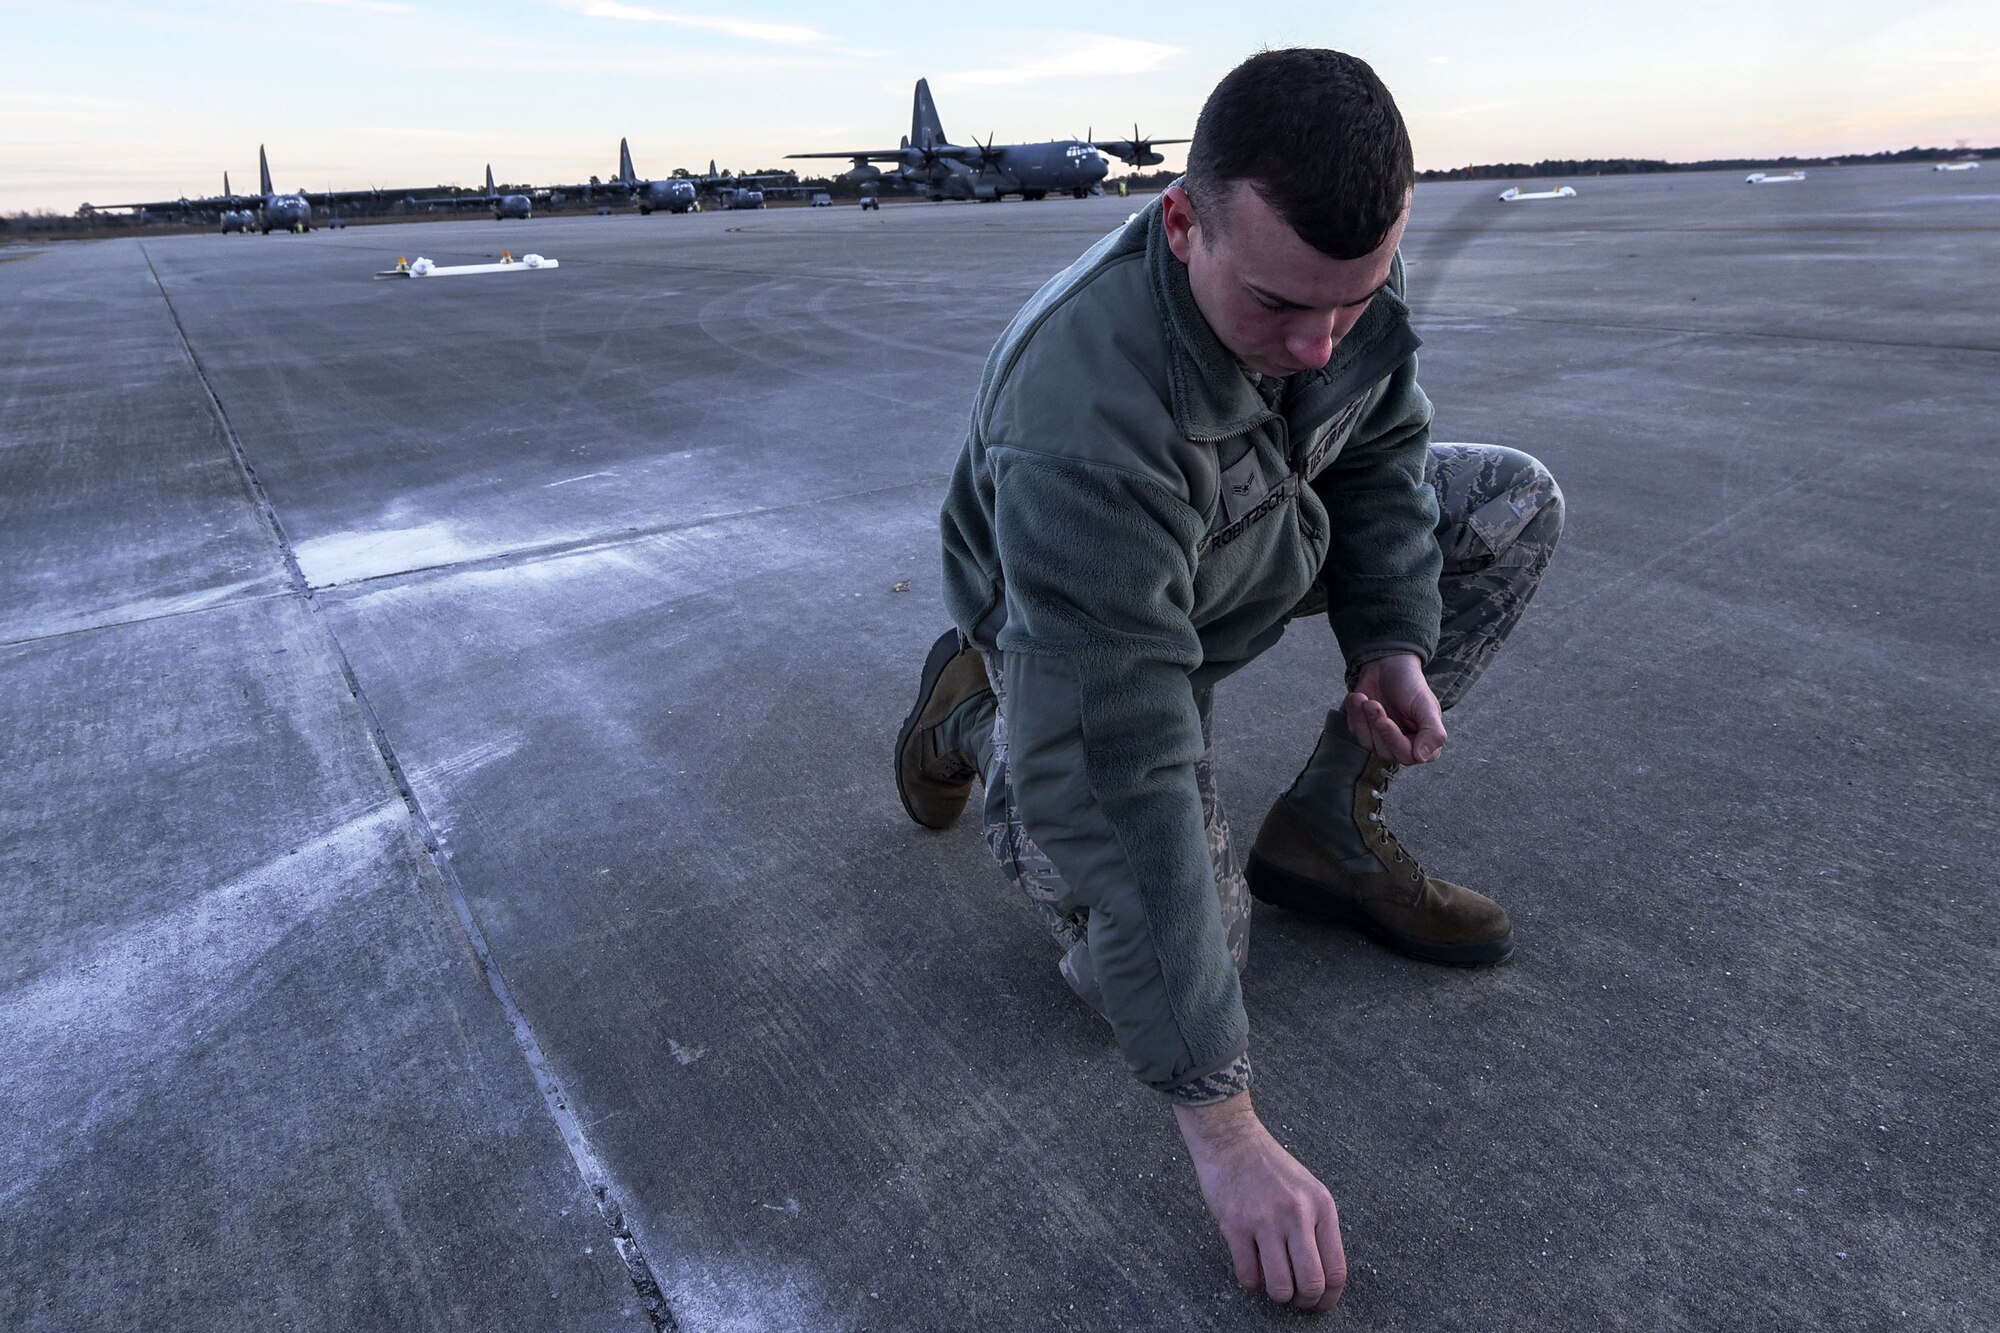 Senior Airman Reed Robitzsch, 23d Maintenance Squadron aircraft structural maintenance journeyman, picks up debris off the flight line during a foreign object debris (FOD) walk, Jan. 2, 2018, at Moody Air Force Base, Ga. The FOD walk was performed following the winter holidays to remove any debris that could potentially cause damage to aircraft or vehicles. (U.S. Air Force photo by Airman Eugene Oliver)